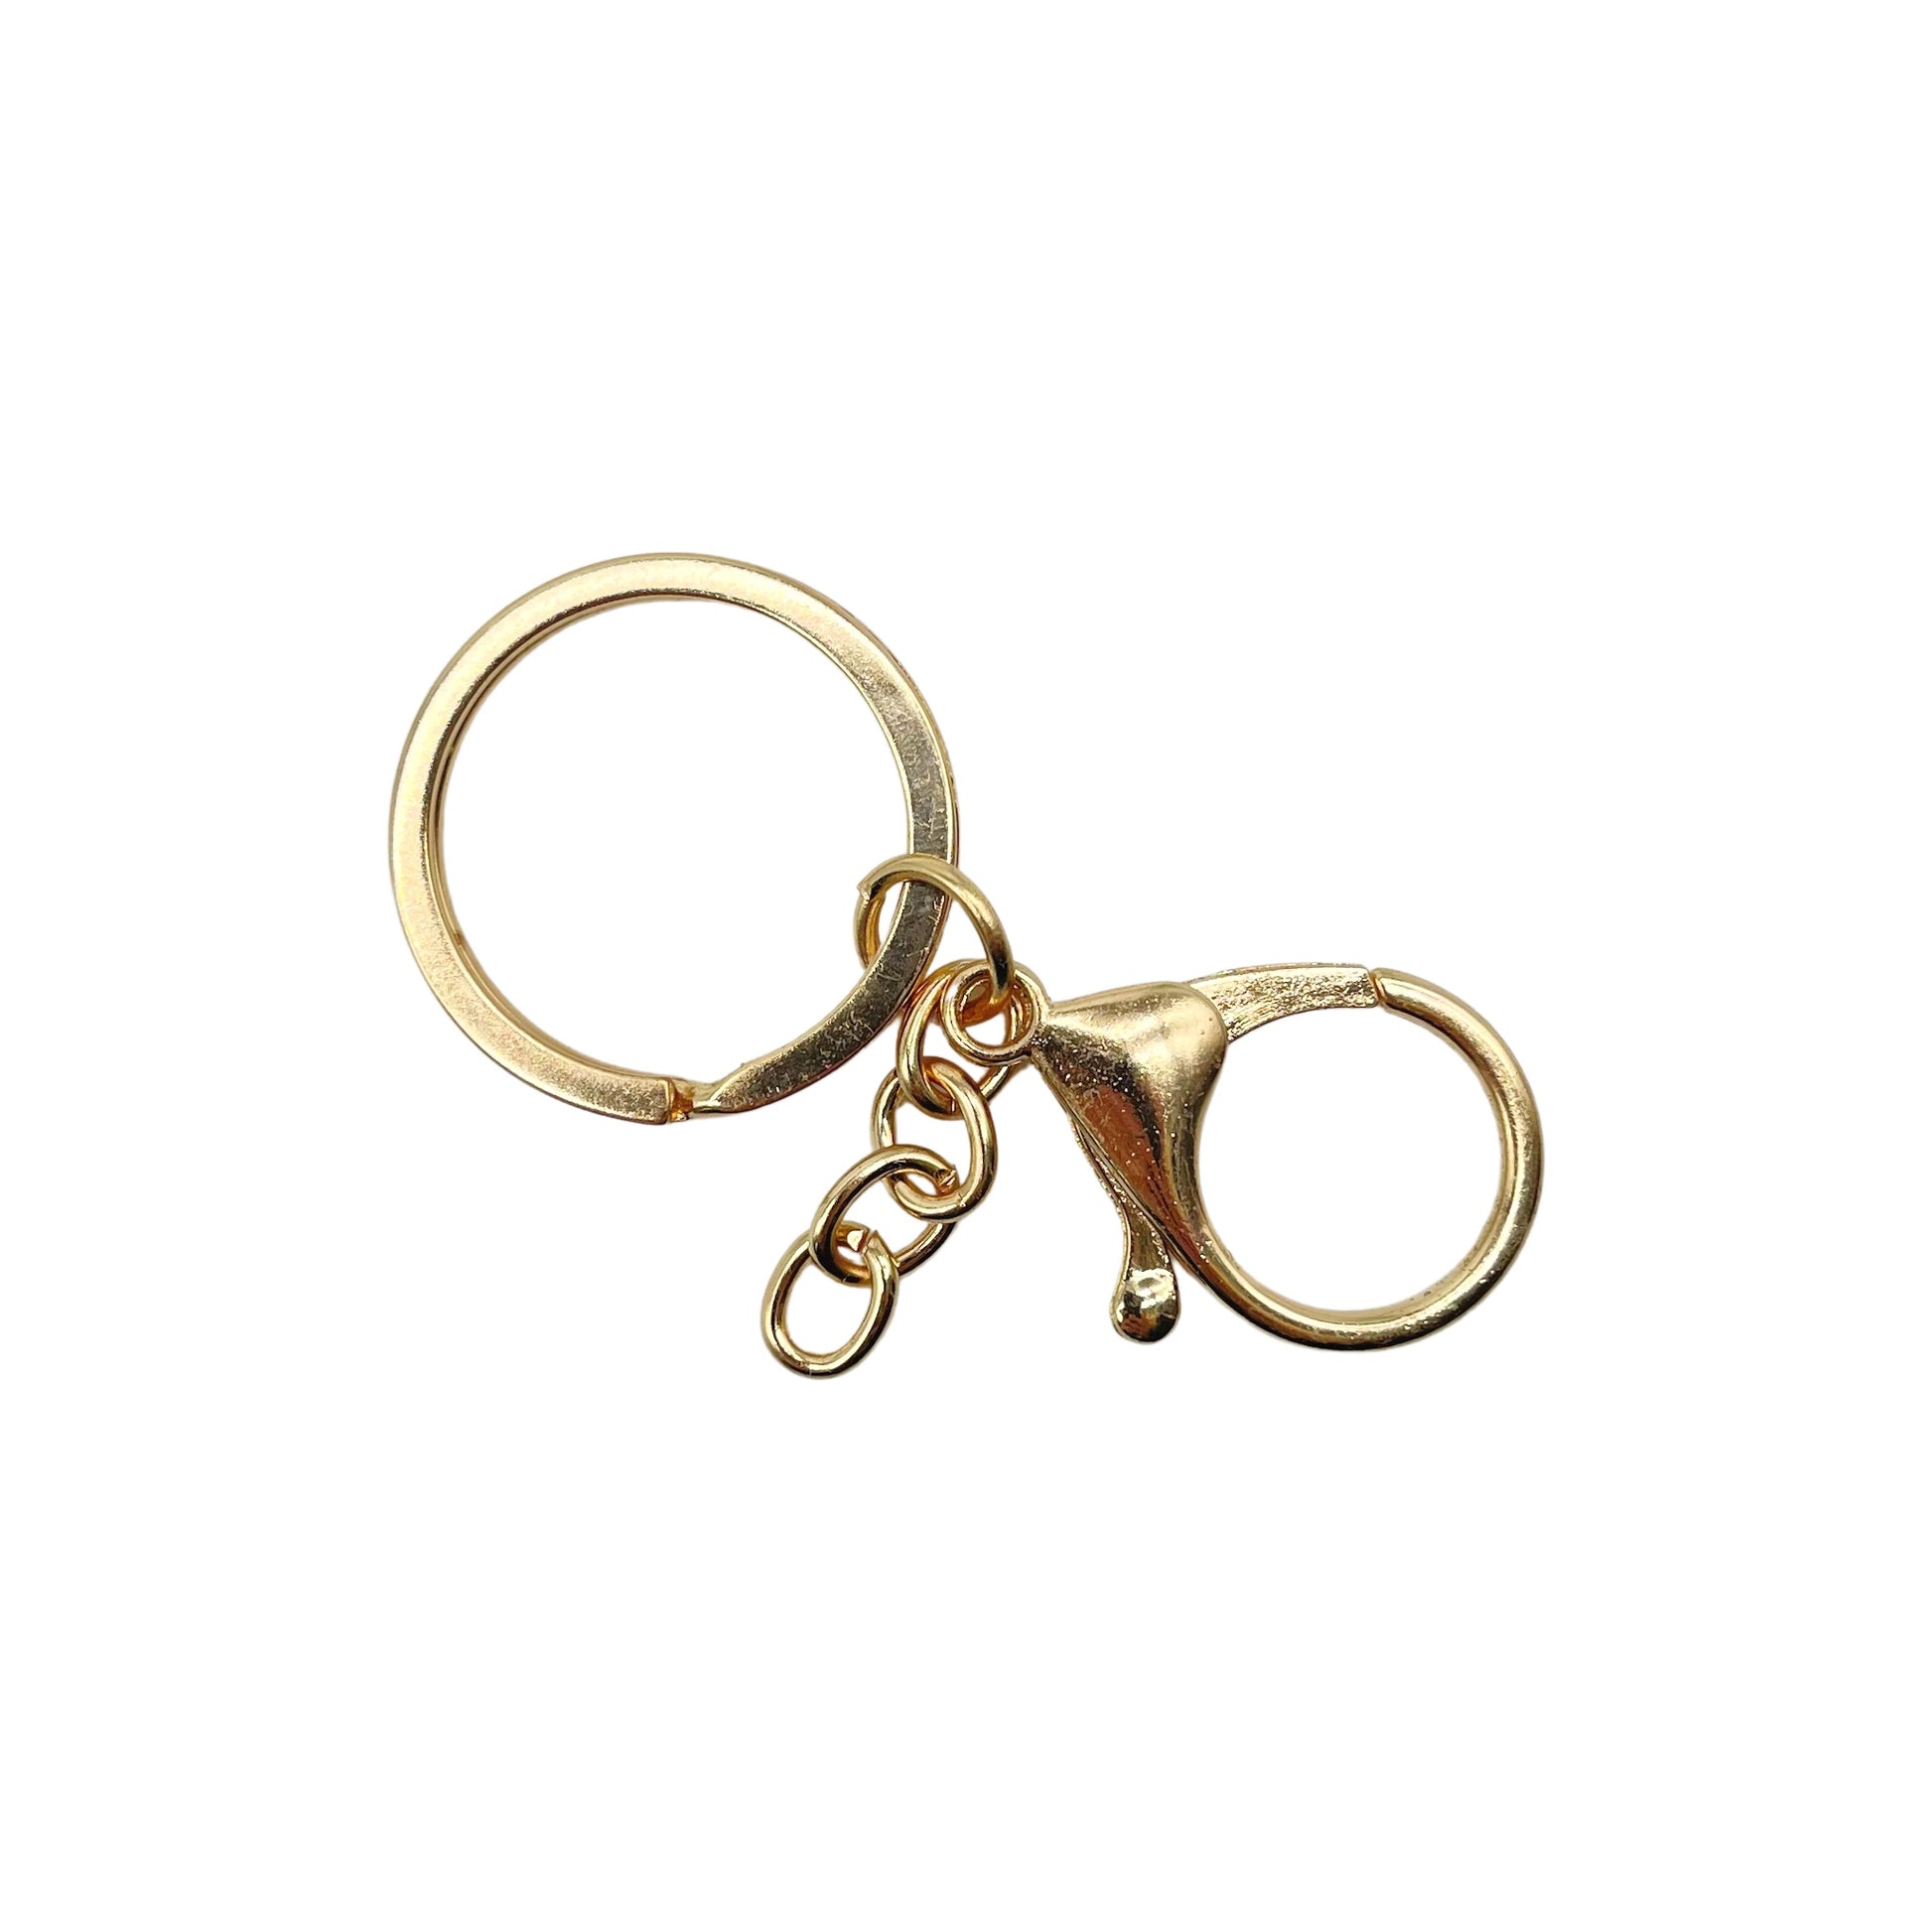 Gold split ring with chain and hook clasp.